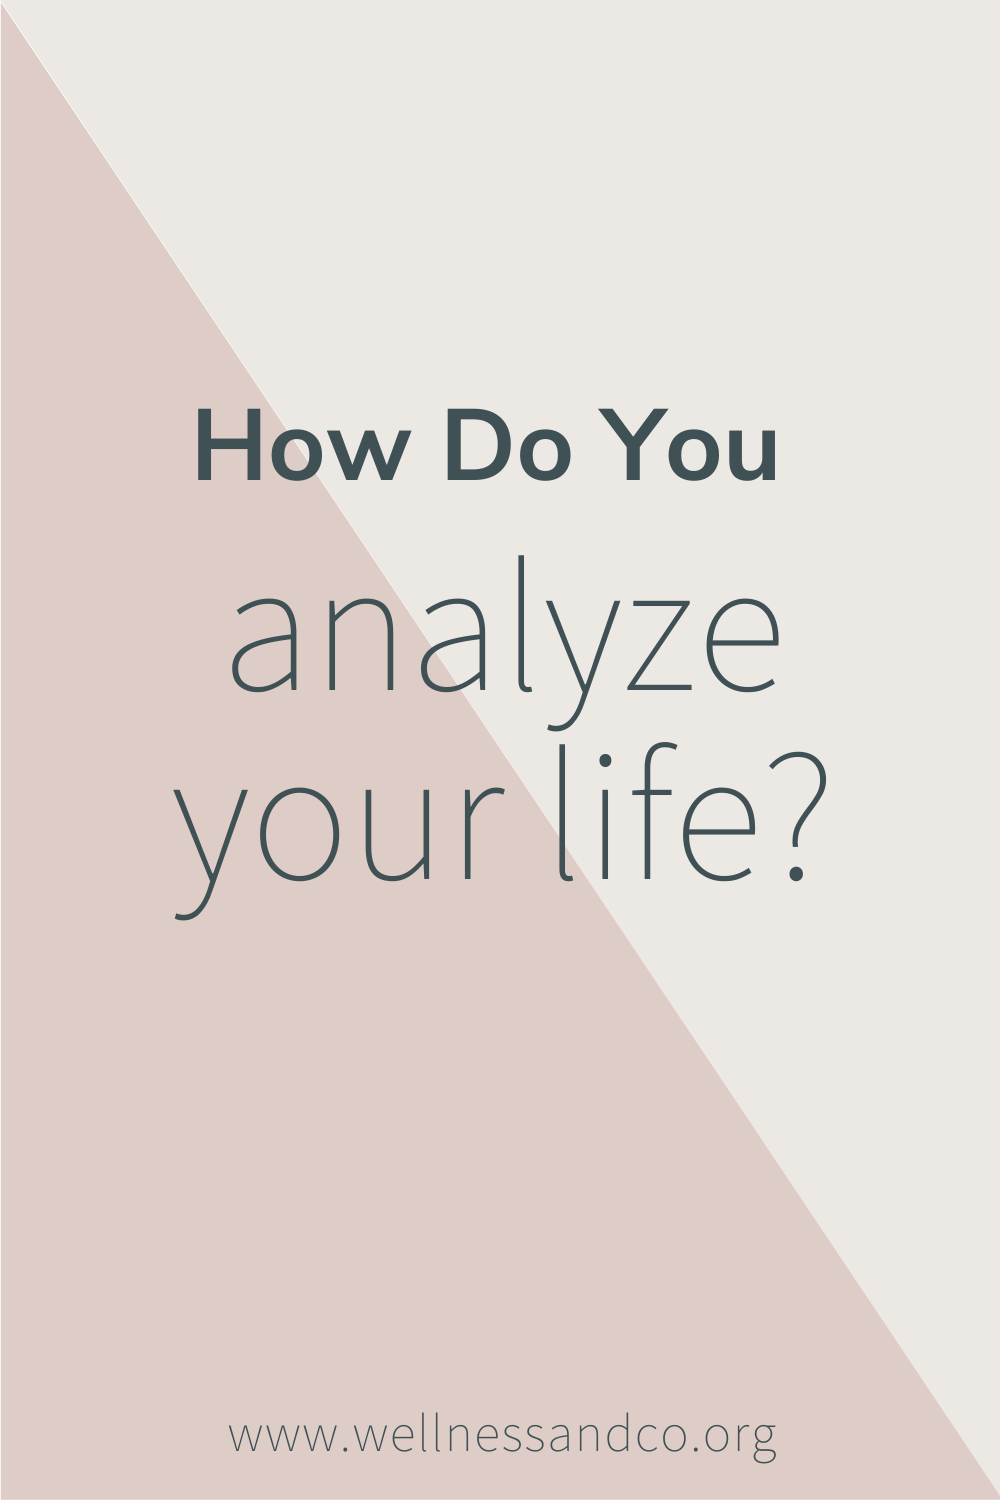 How Do You Analyze Your Life? | When you think about your own journey, how do you analyze it? Our internal narratives play a big role in how we see ourselves and what we do next. Dive deeper into your internal world and explore your own internal narratives, cheers!